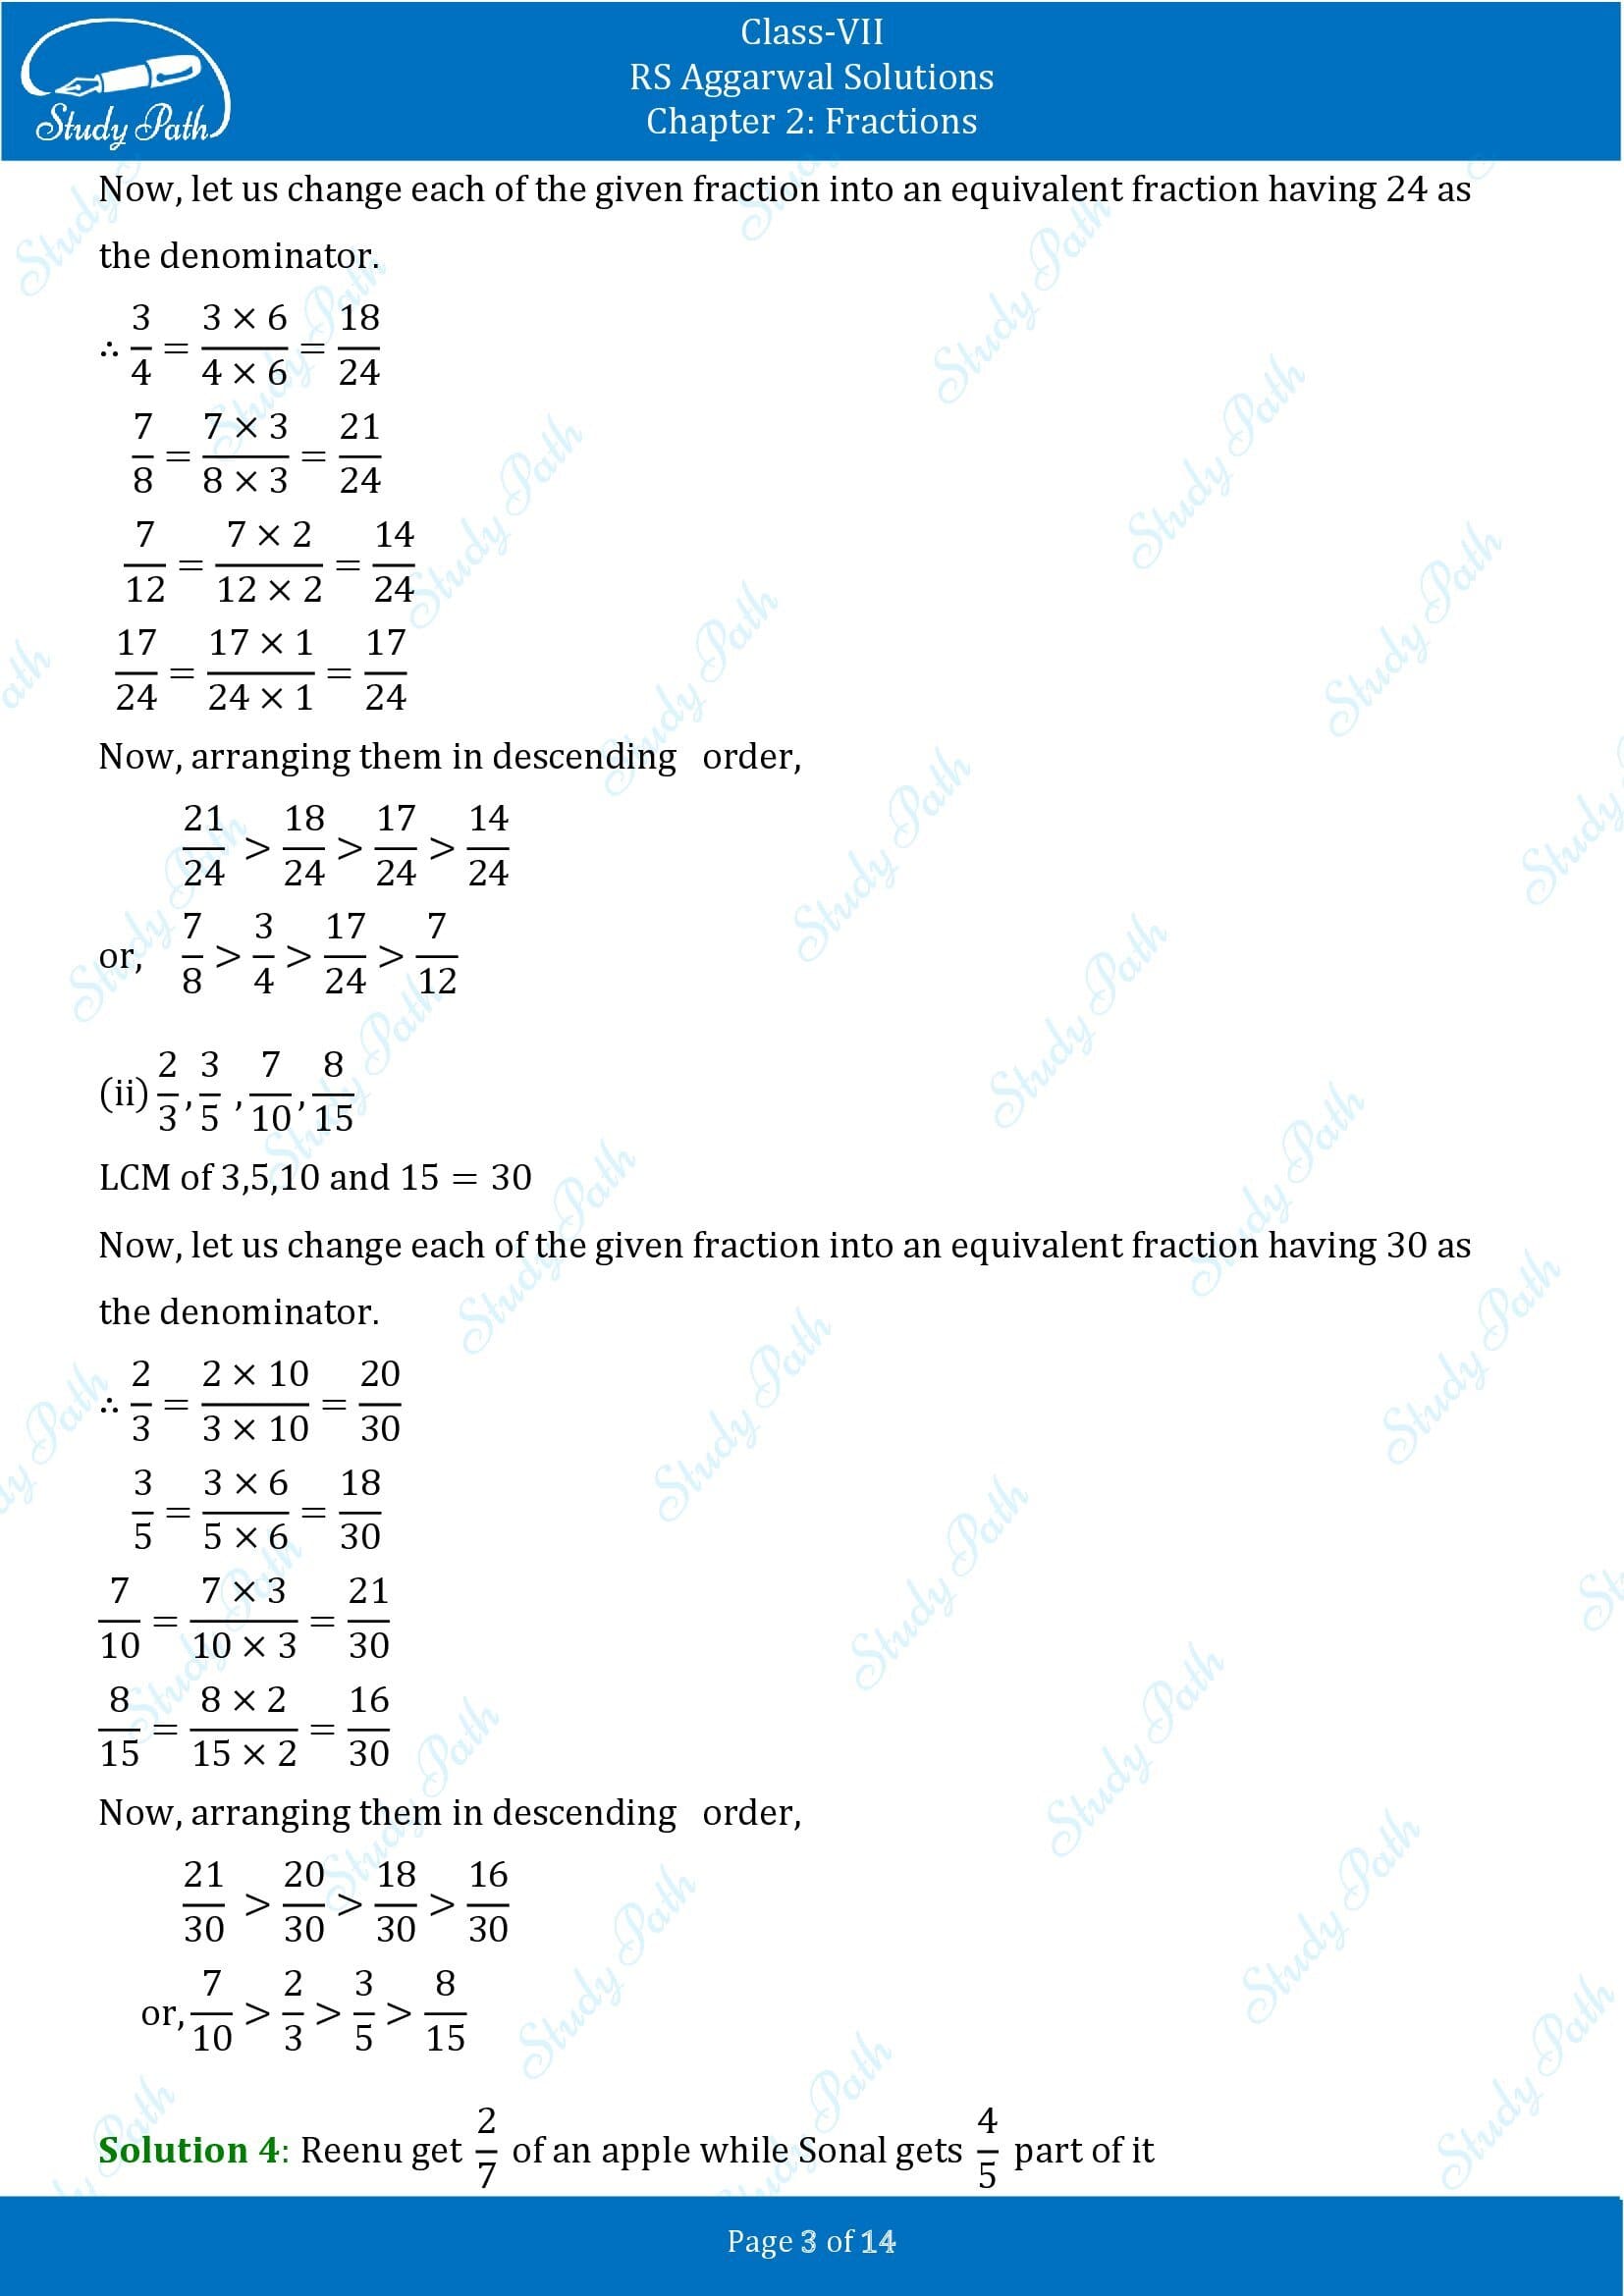 RS Aggarwal Solutions Class 7 Chapter 2 Fractions Exercise 2A 00003